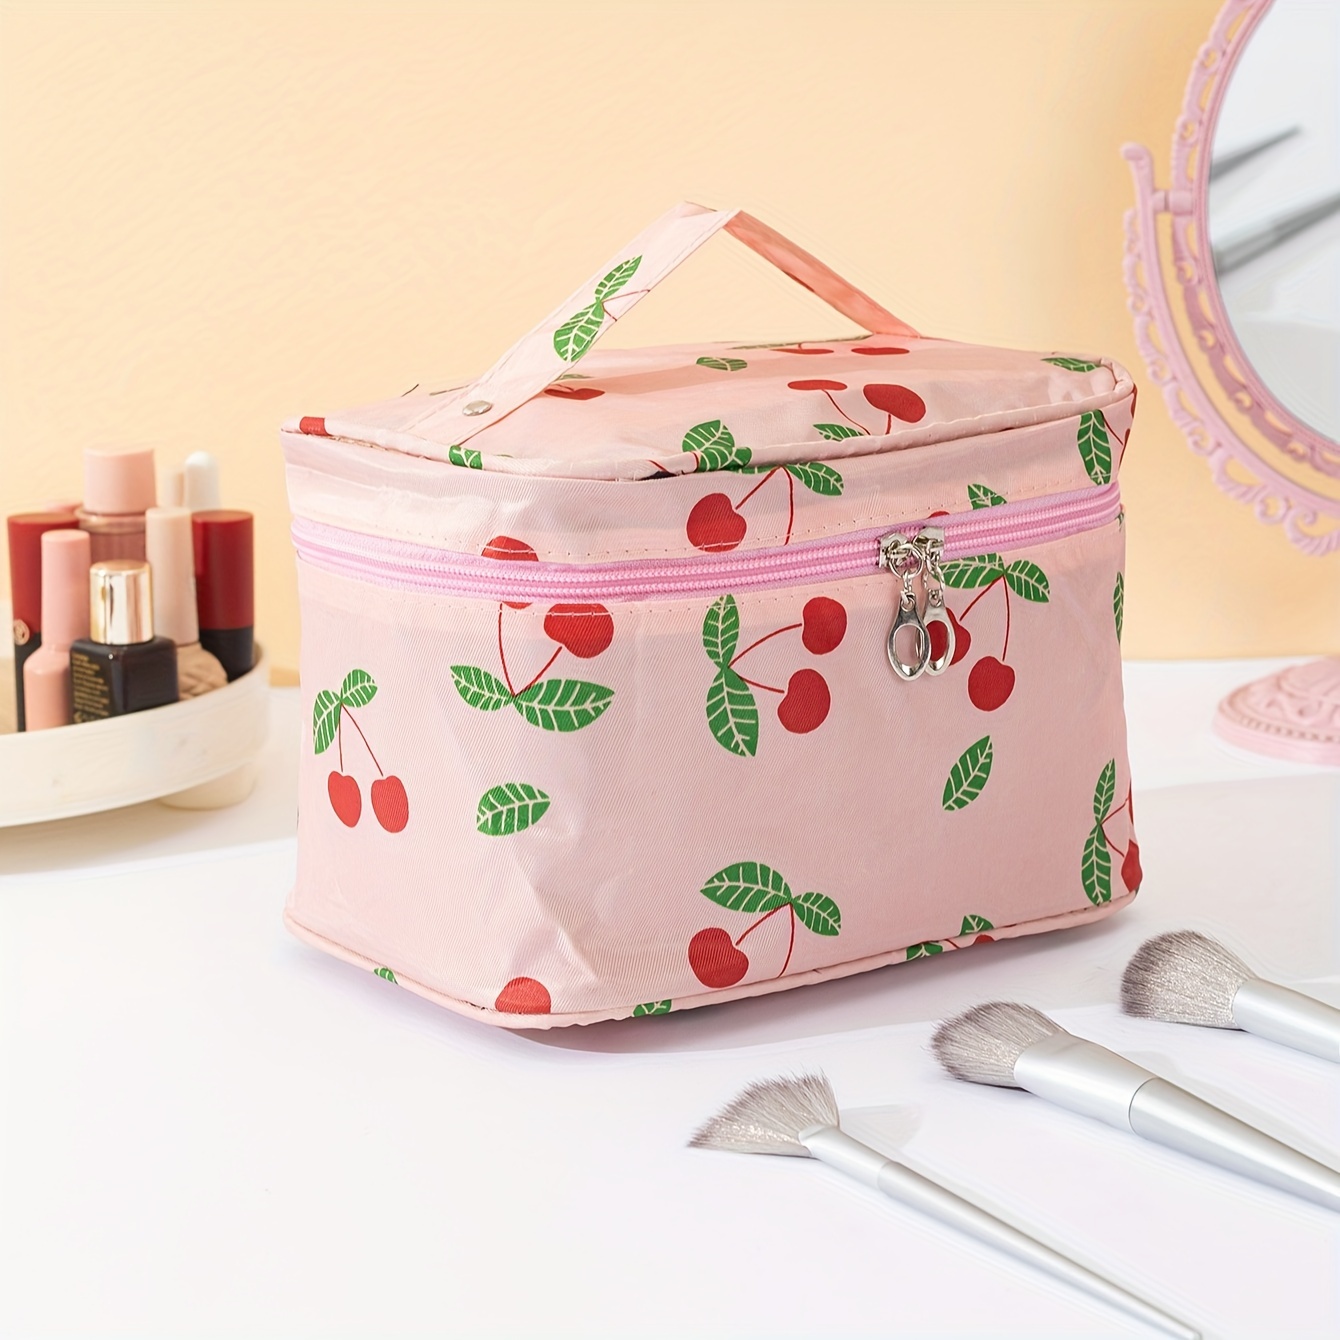 

Makeup Bag Travel Portable Cosmetic Storage Bag Make Up Organizer Bag With Mesh Pocket Waterproof Large Capacity Toiletry Storage Bags Cute For Women And Girls, Cherry Pattern